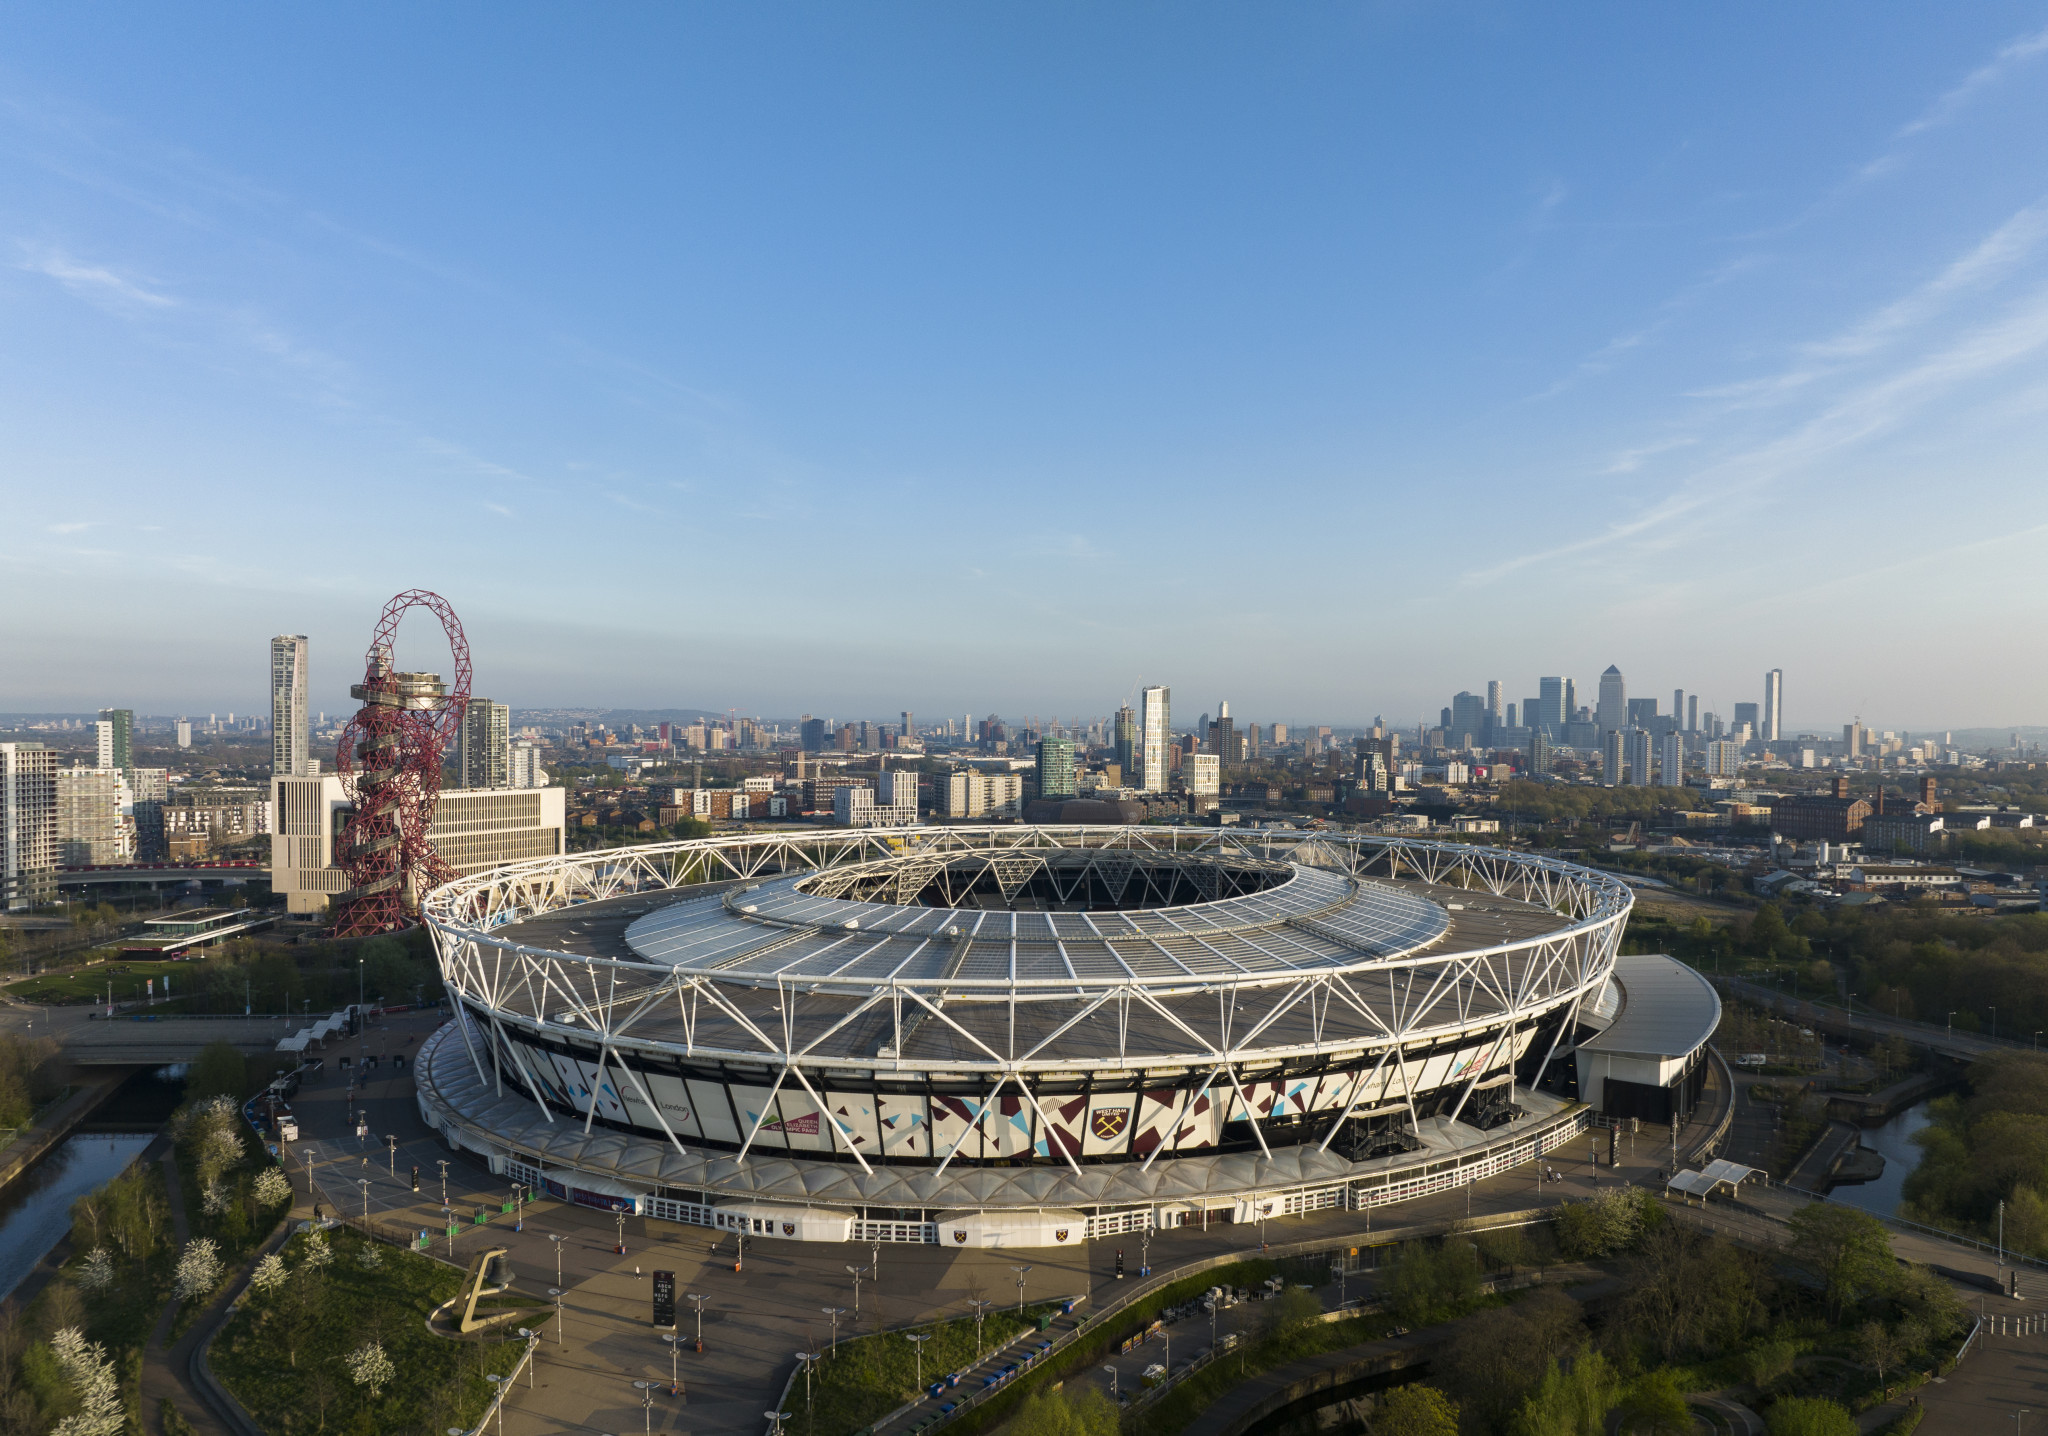 London 2012 venue the London Stadium is among the shortlisted venues for the UK and Ireland's Euro 2028 bid ©Getty Images